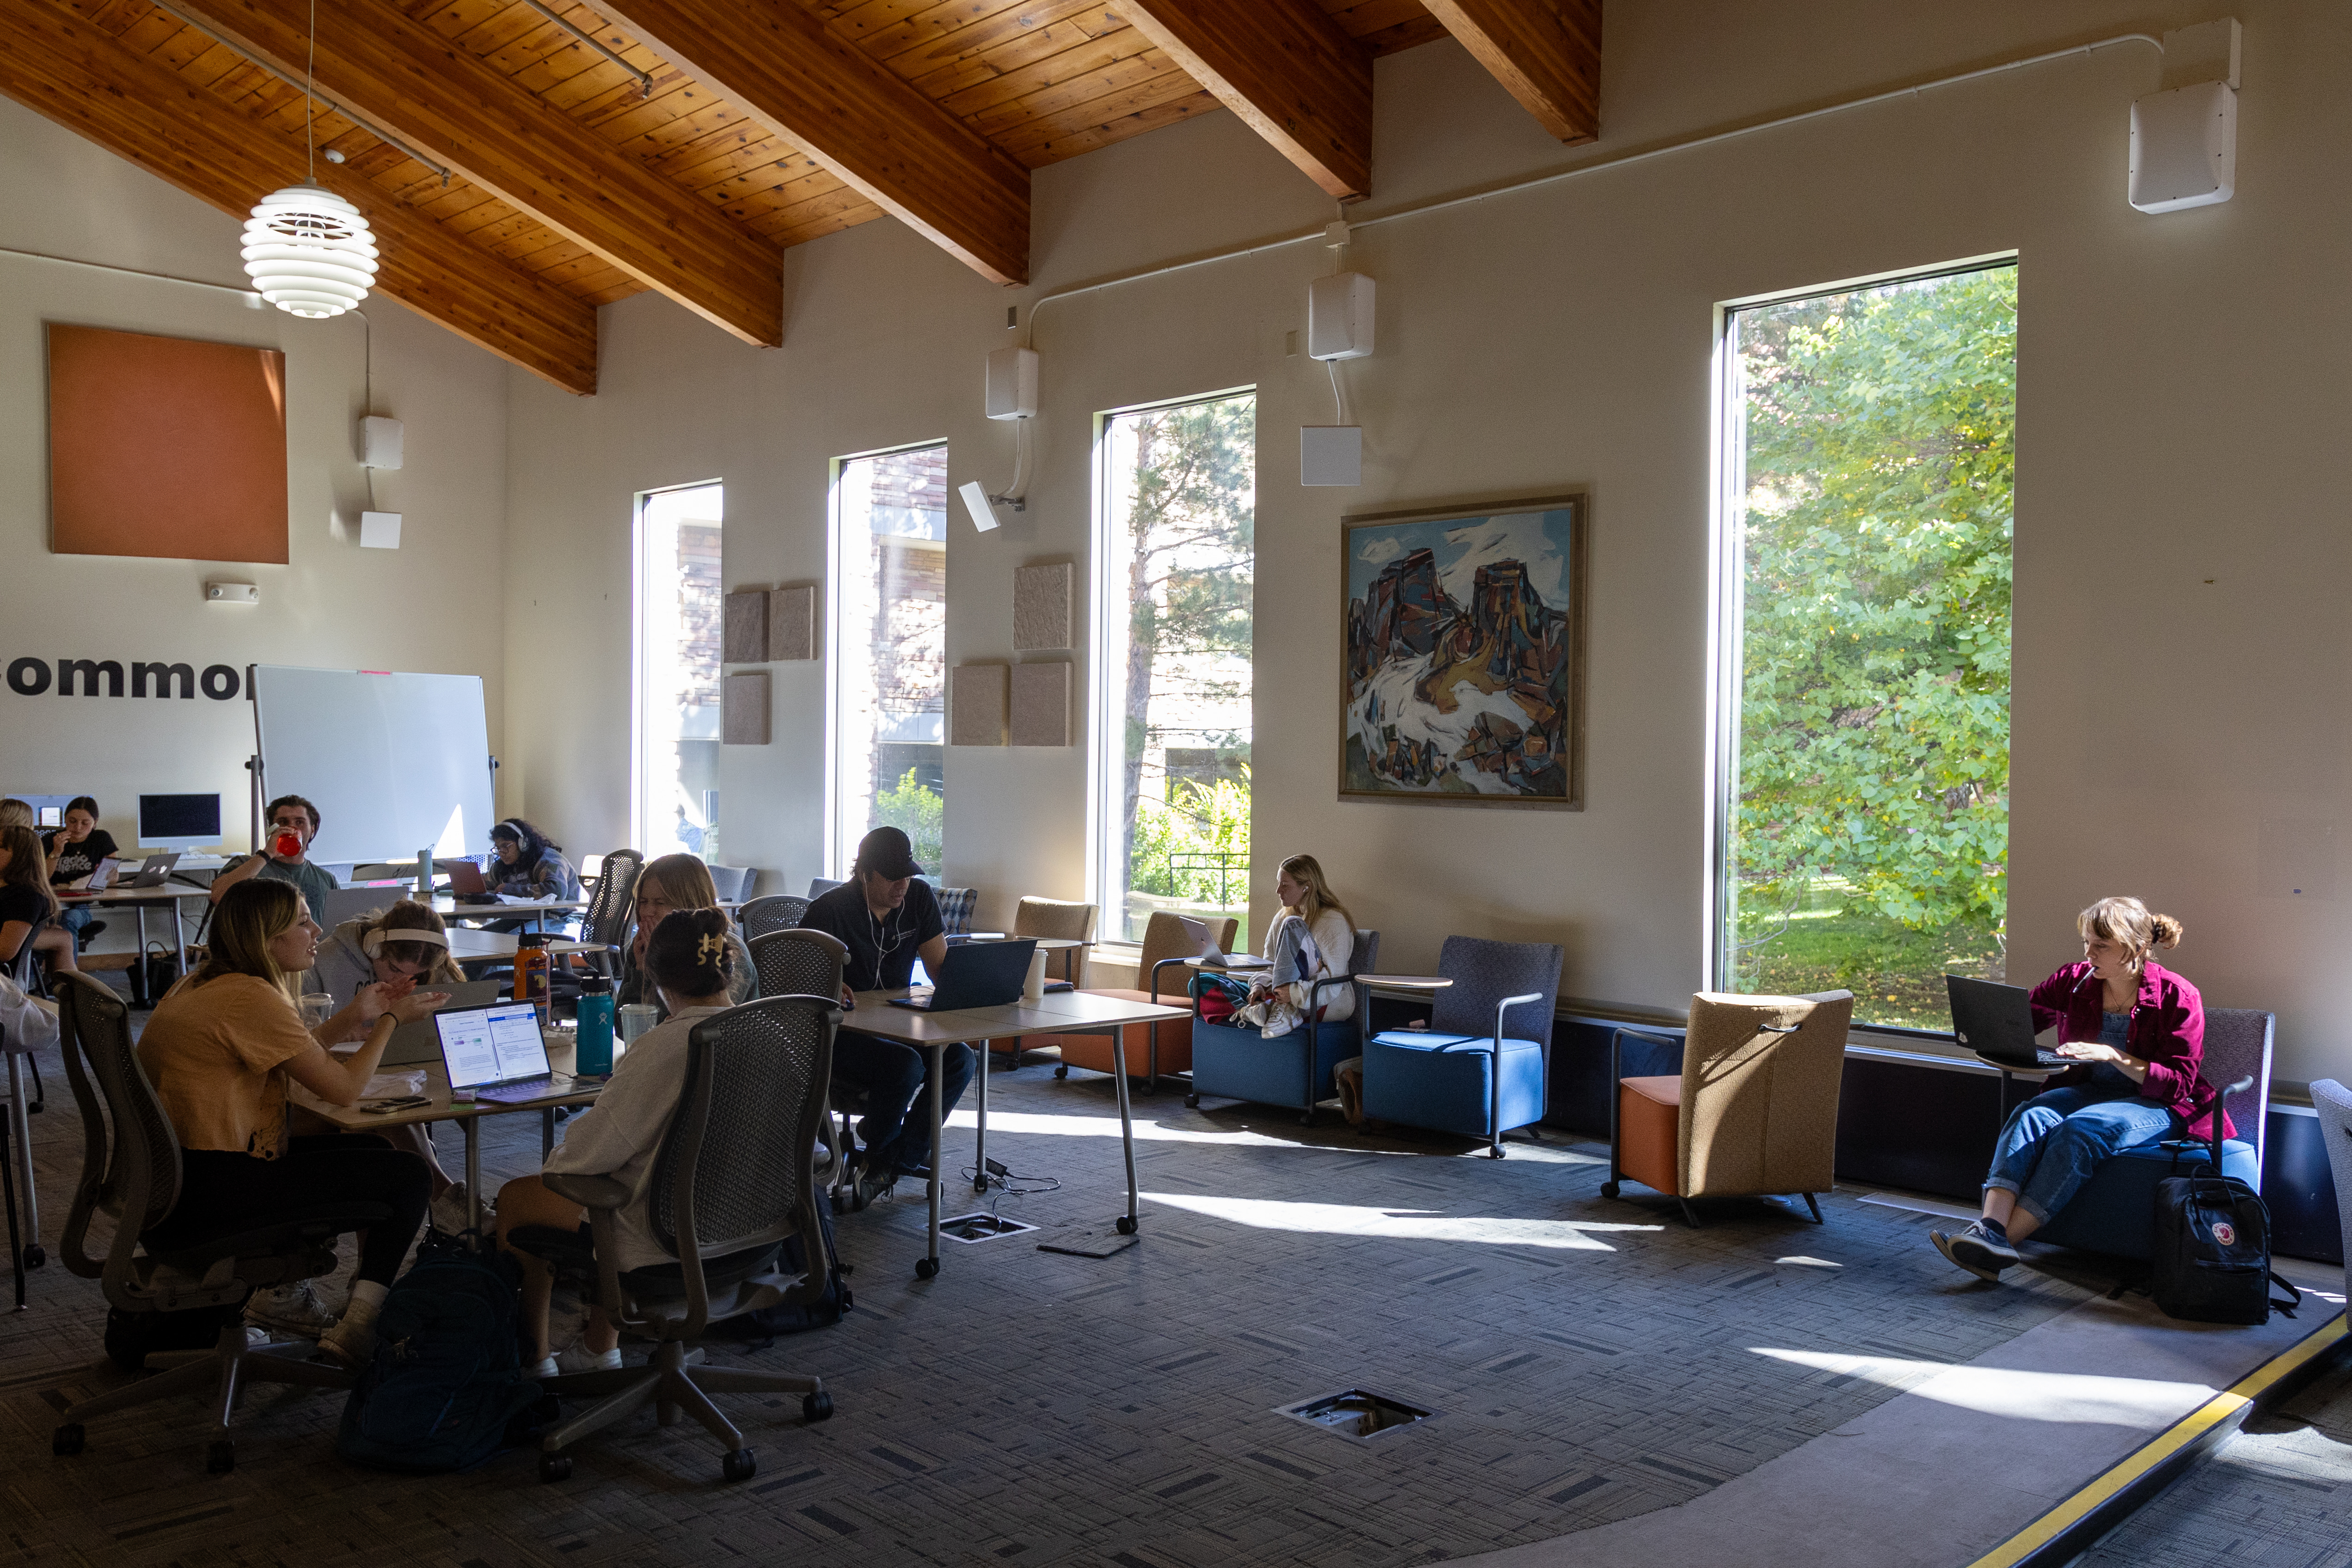 Students studying in Norlin Commons